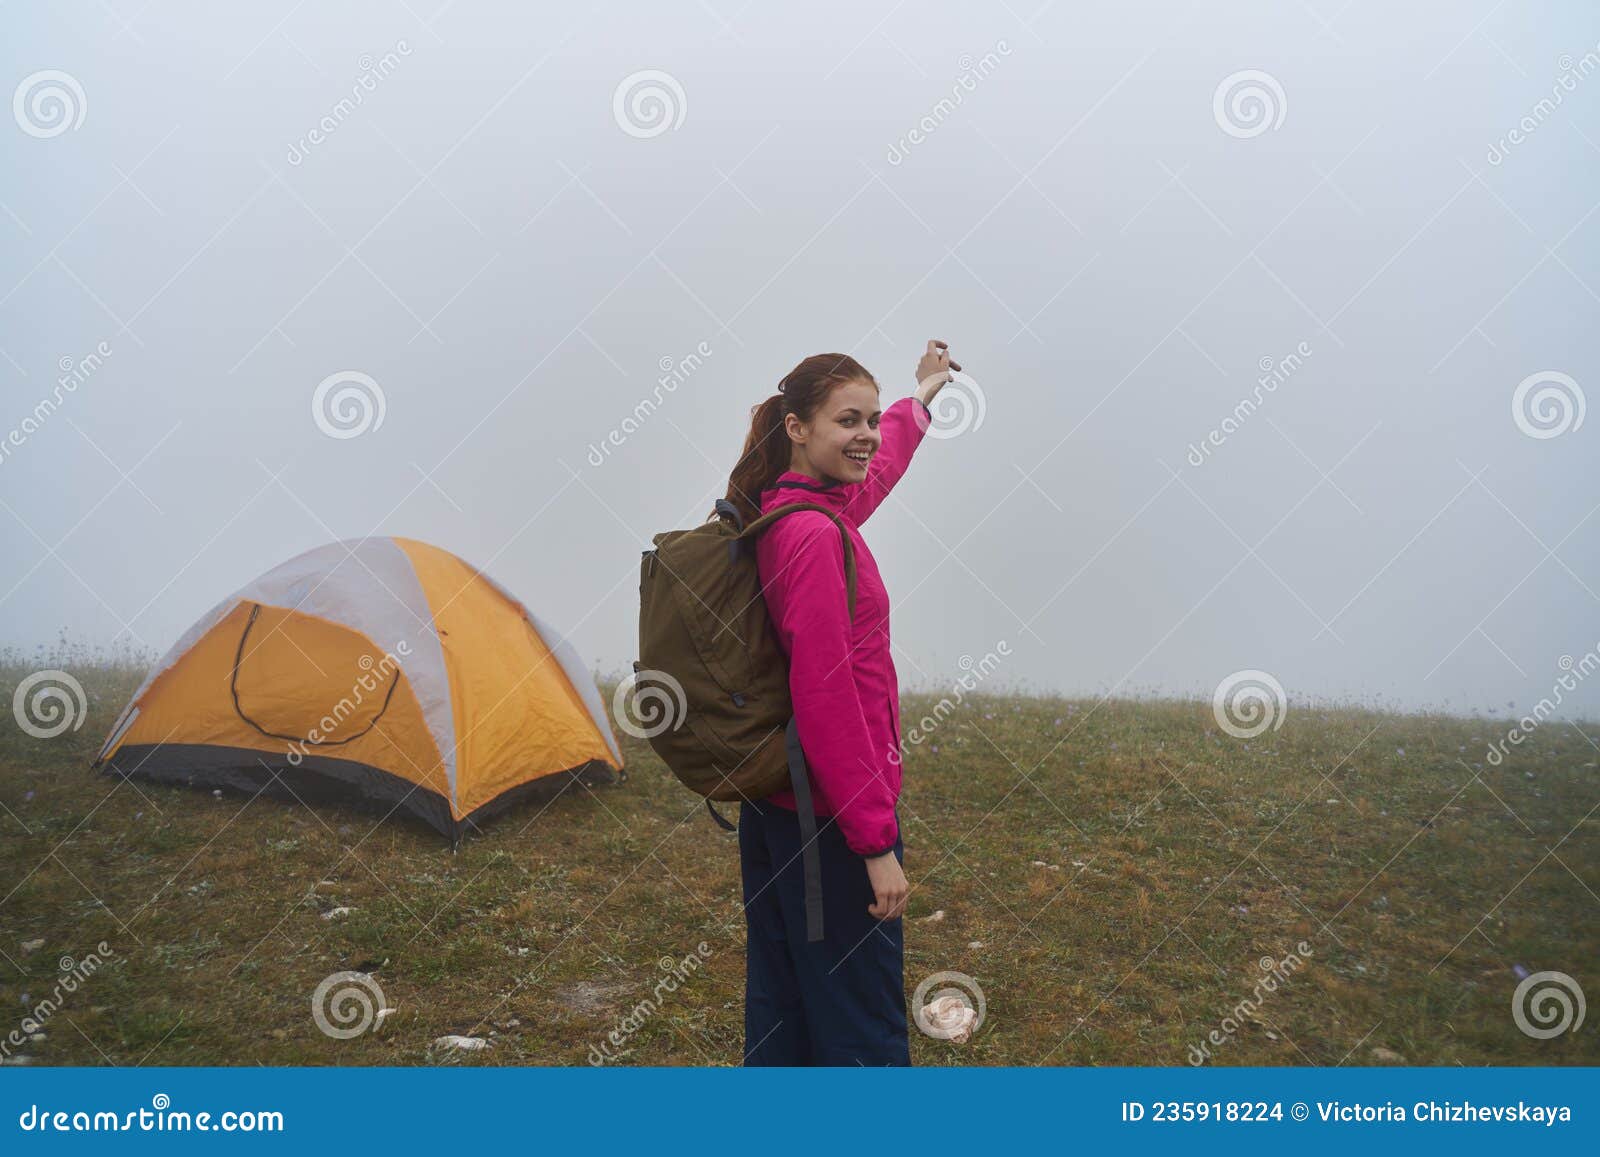 women in nature with a backpack in the mountains fog nature